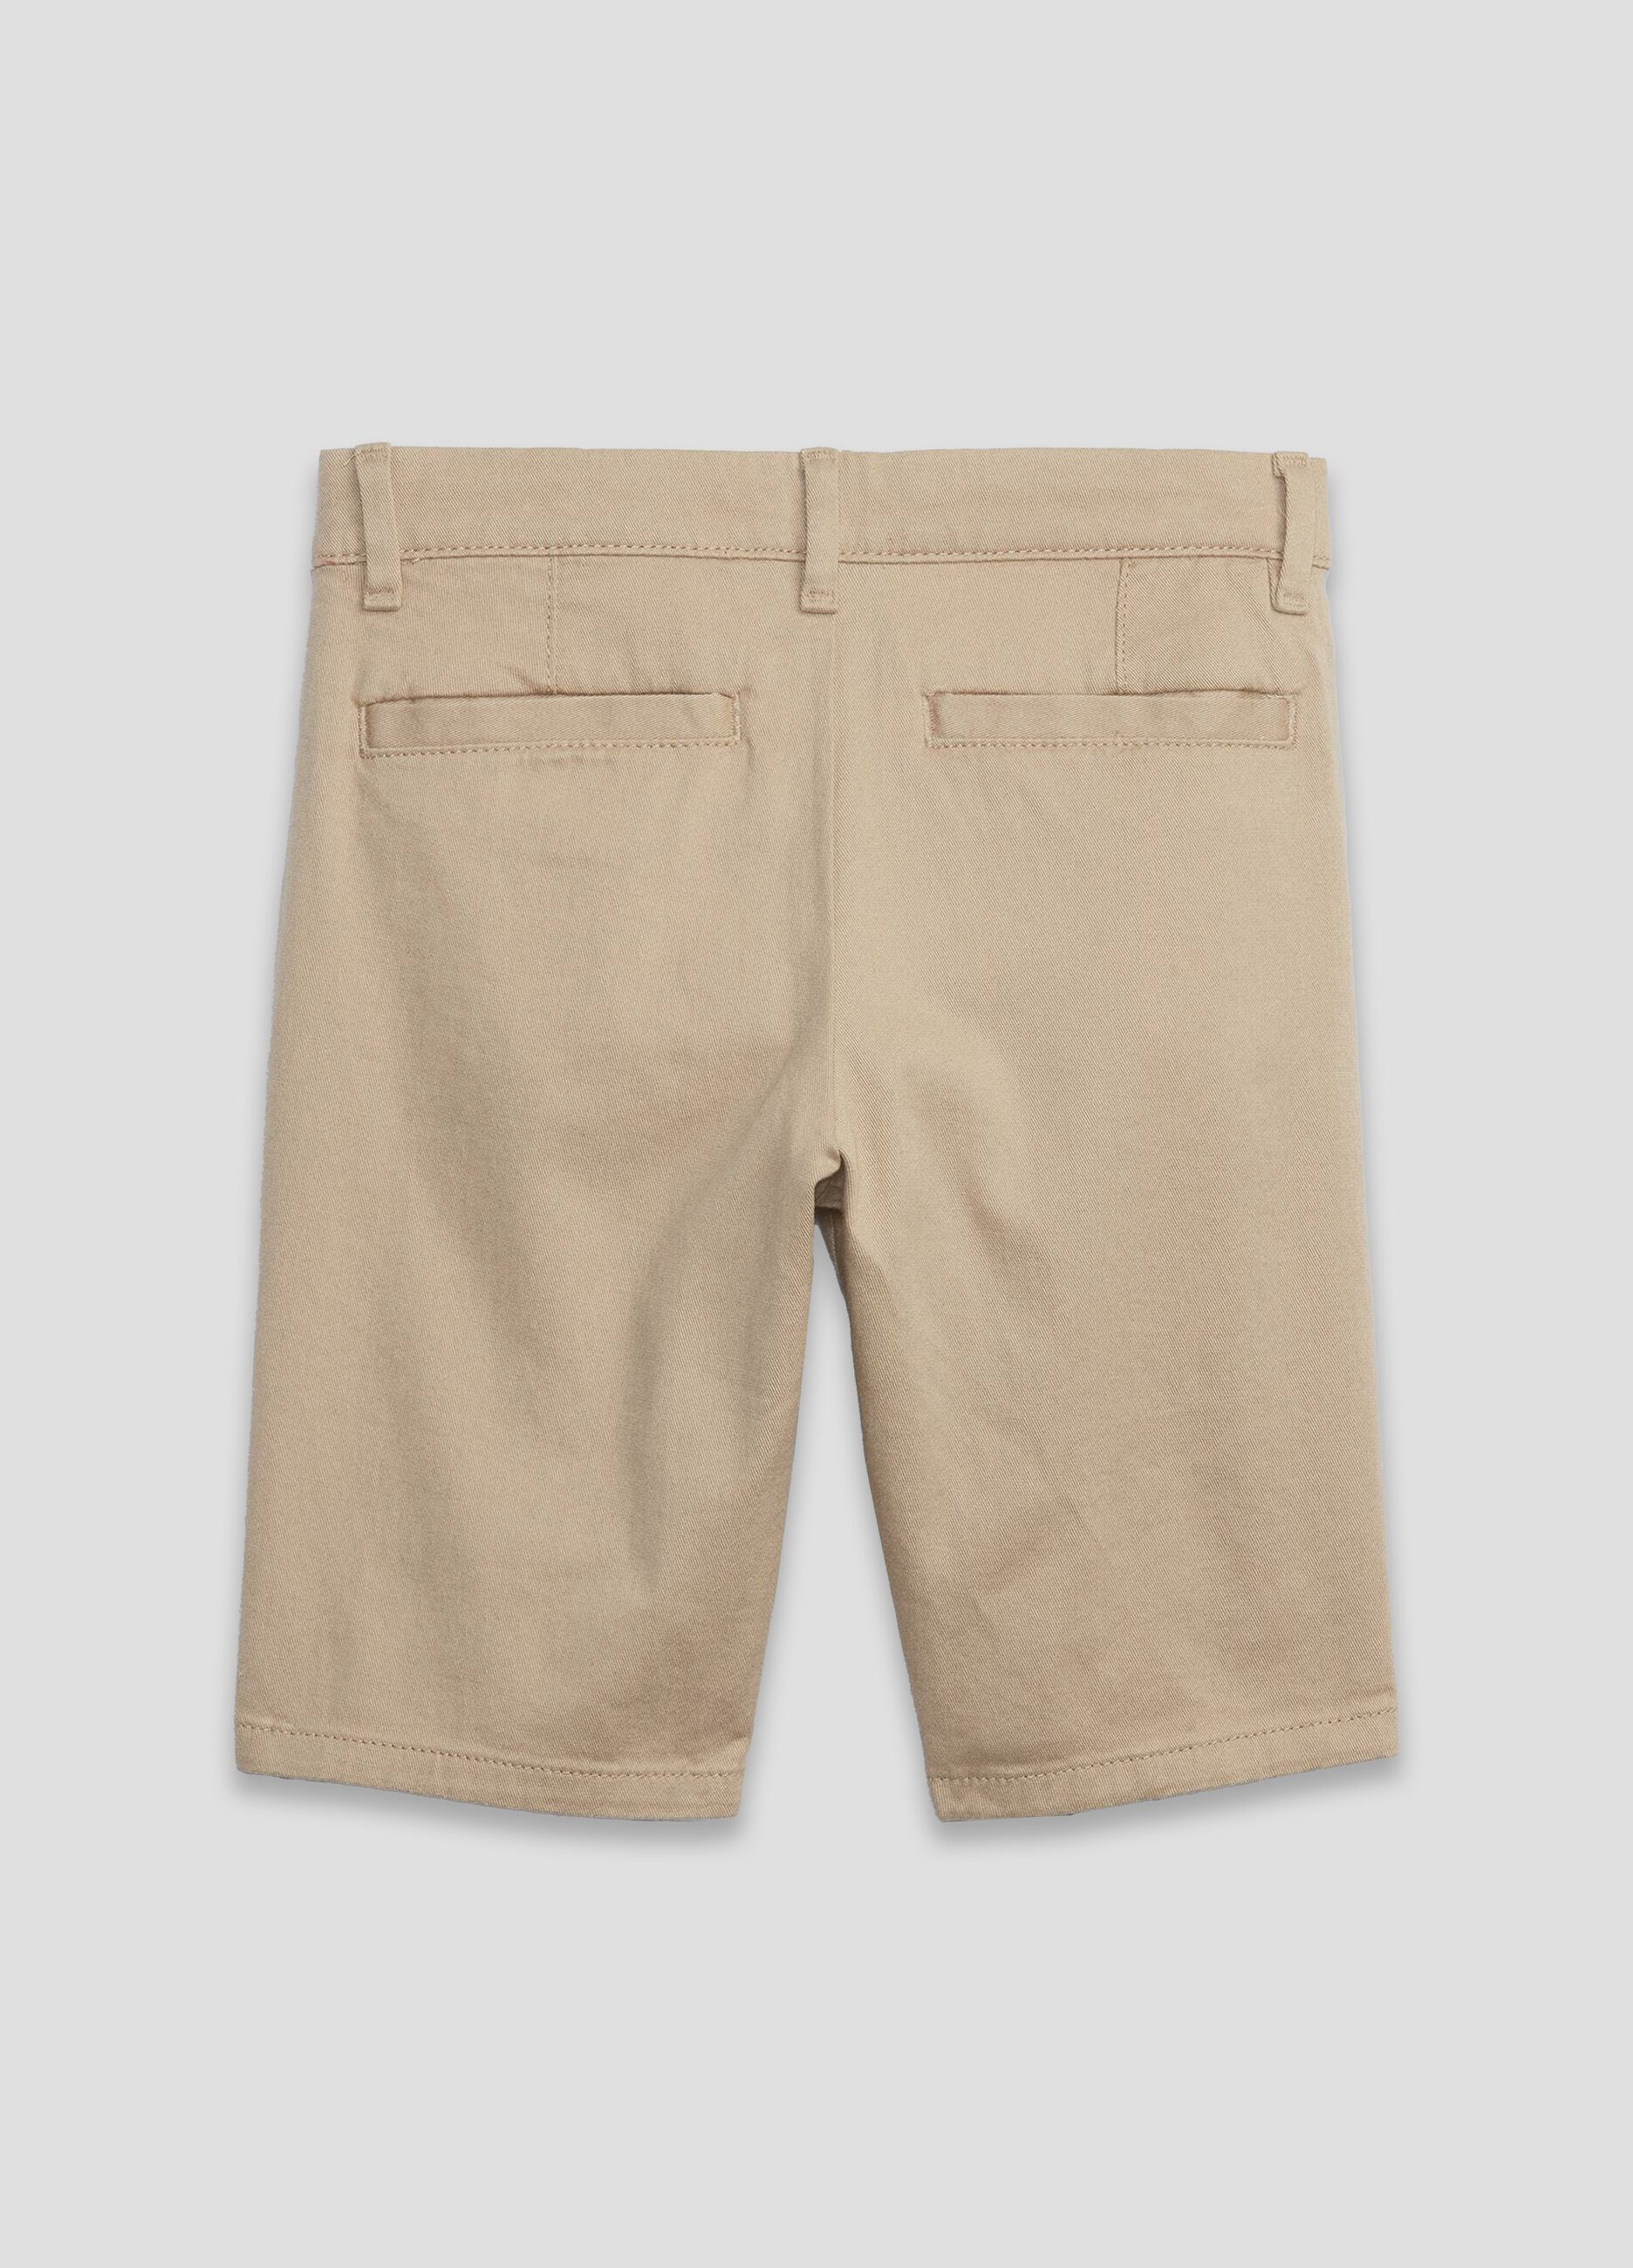 Solid colour Bermuda shorts with pockets